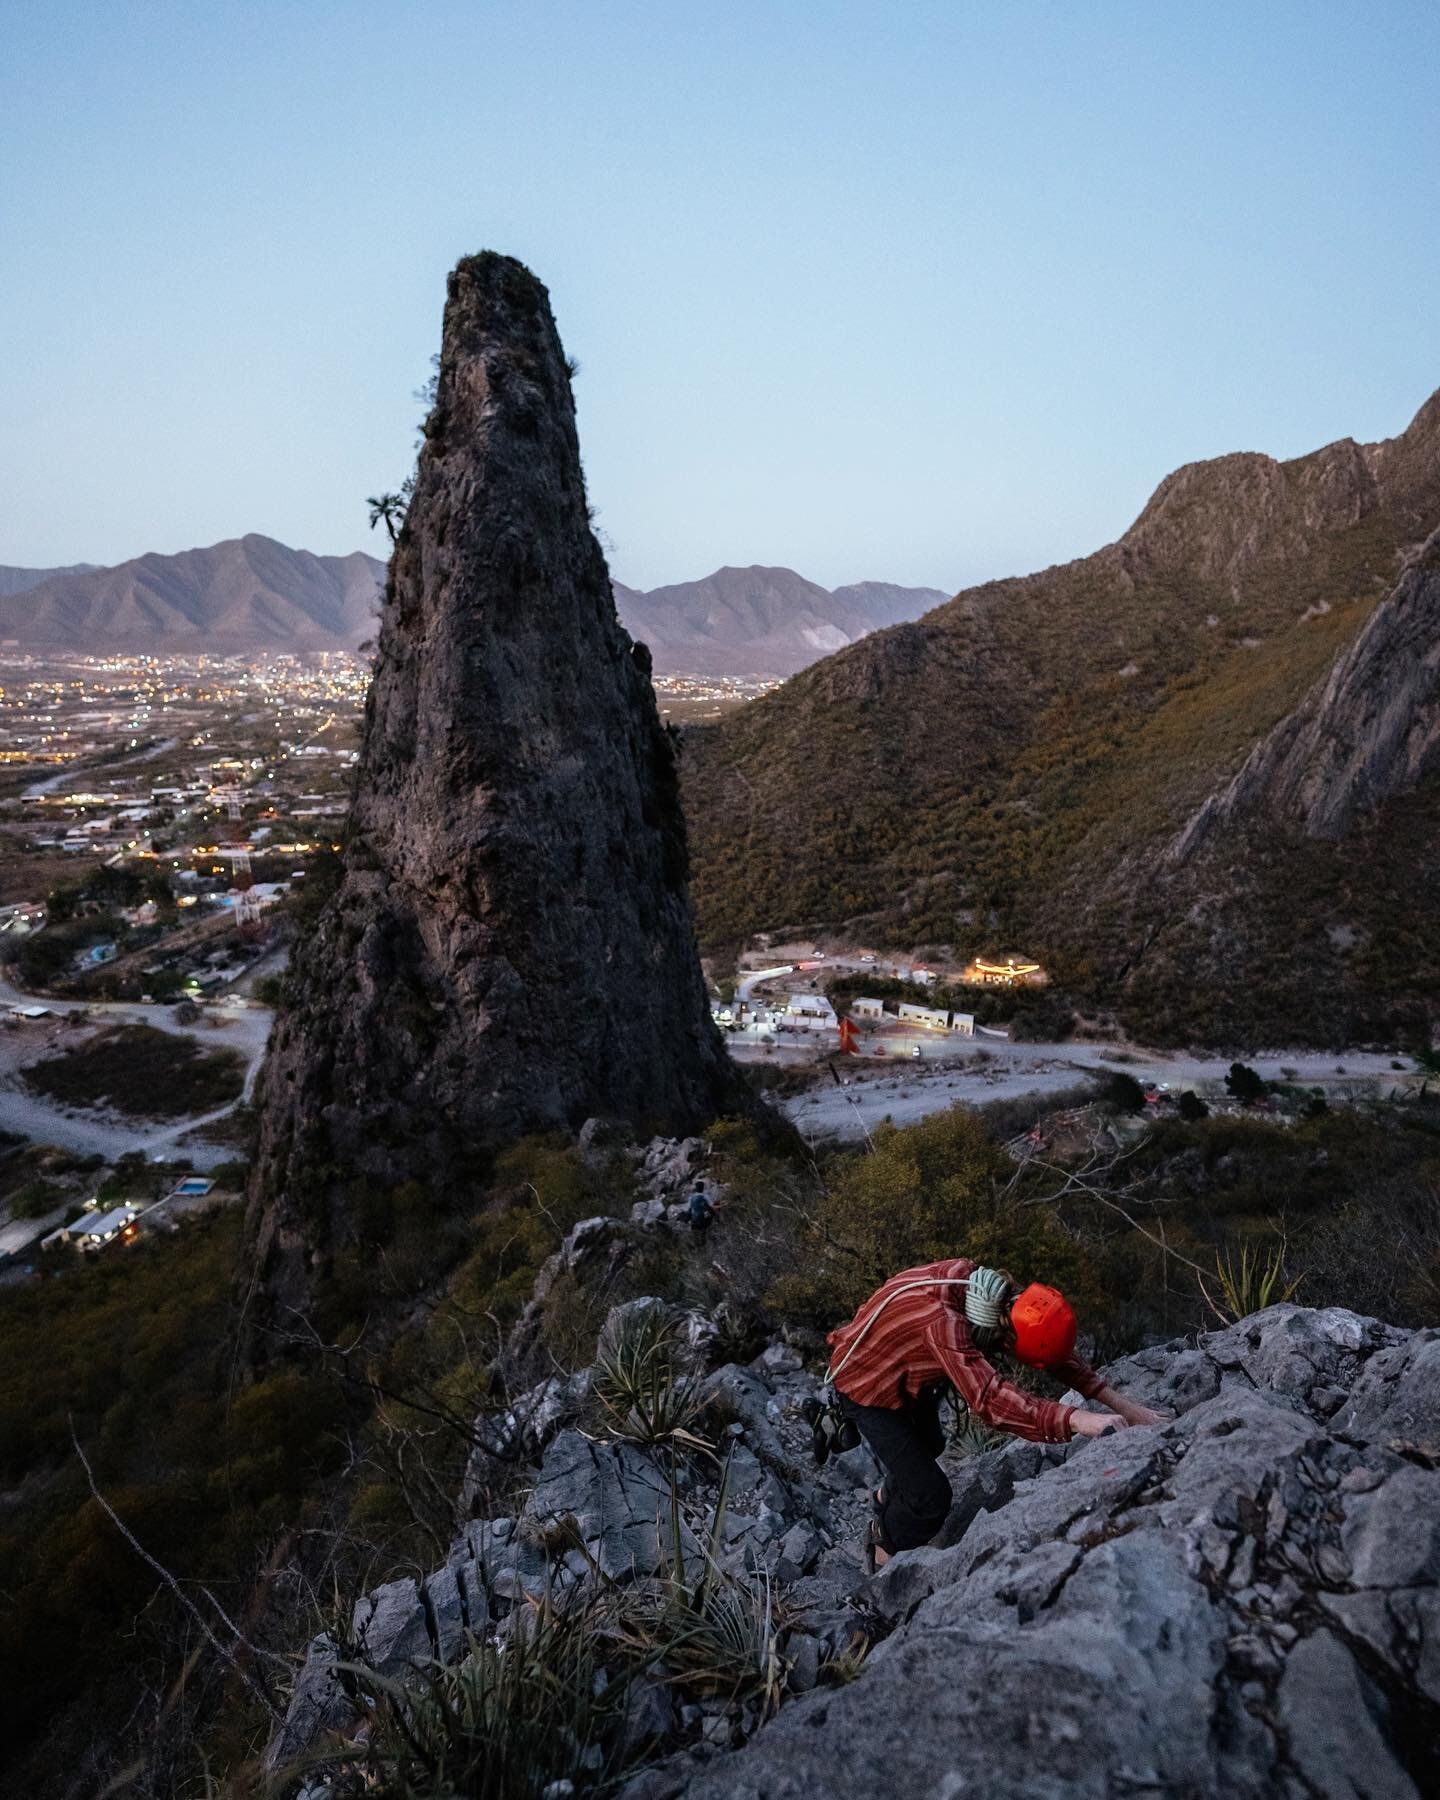 Downclimbing...

This was taken on our 2nd day in El Potrero Chico, Mexico after I had climbed the longest rock climb of my life - all with a backpack full of camera equipment documenting @noah__kane out for a chill little multi-pitch day with friend